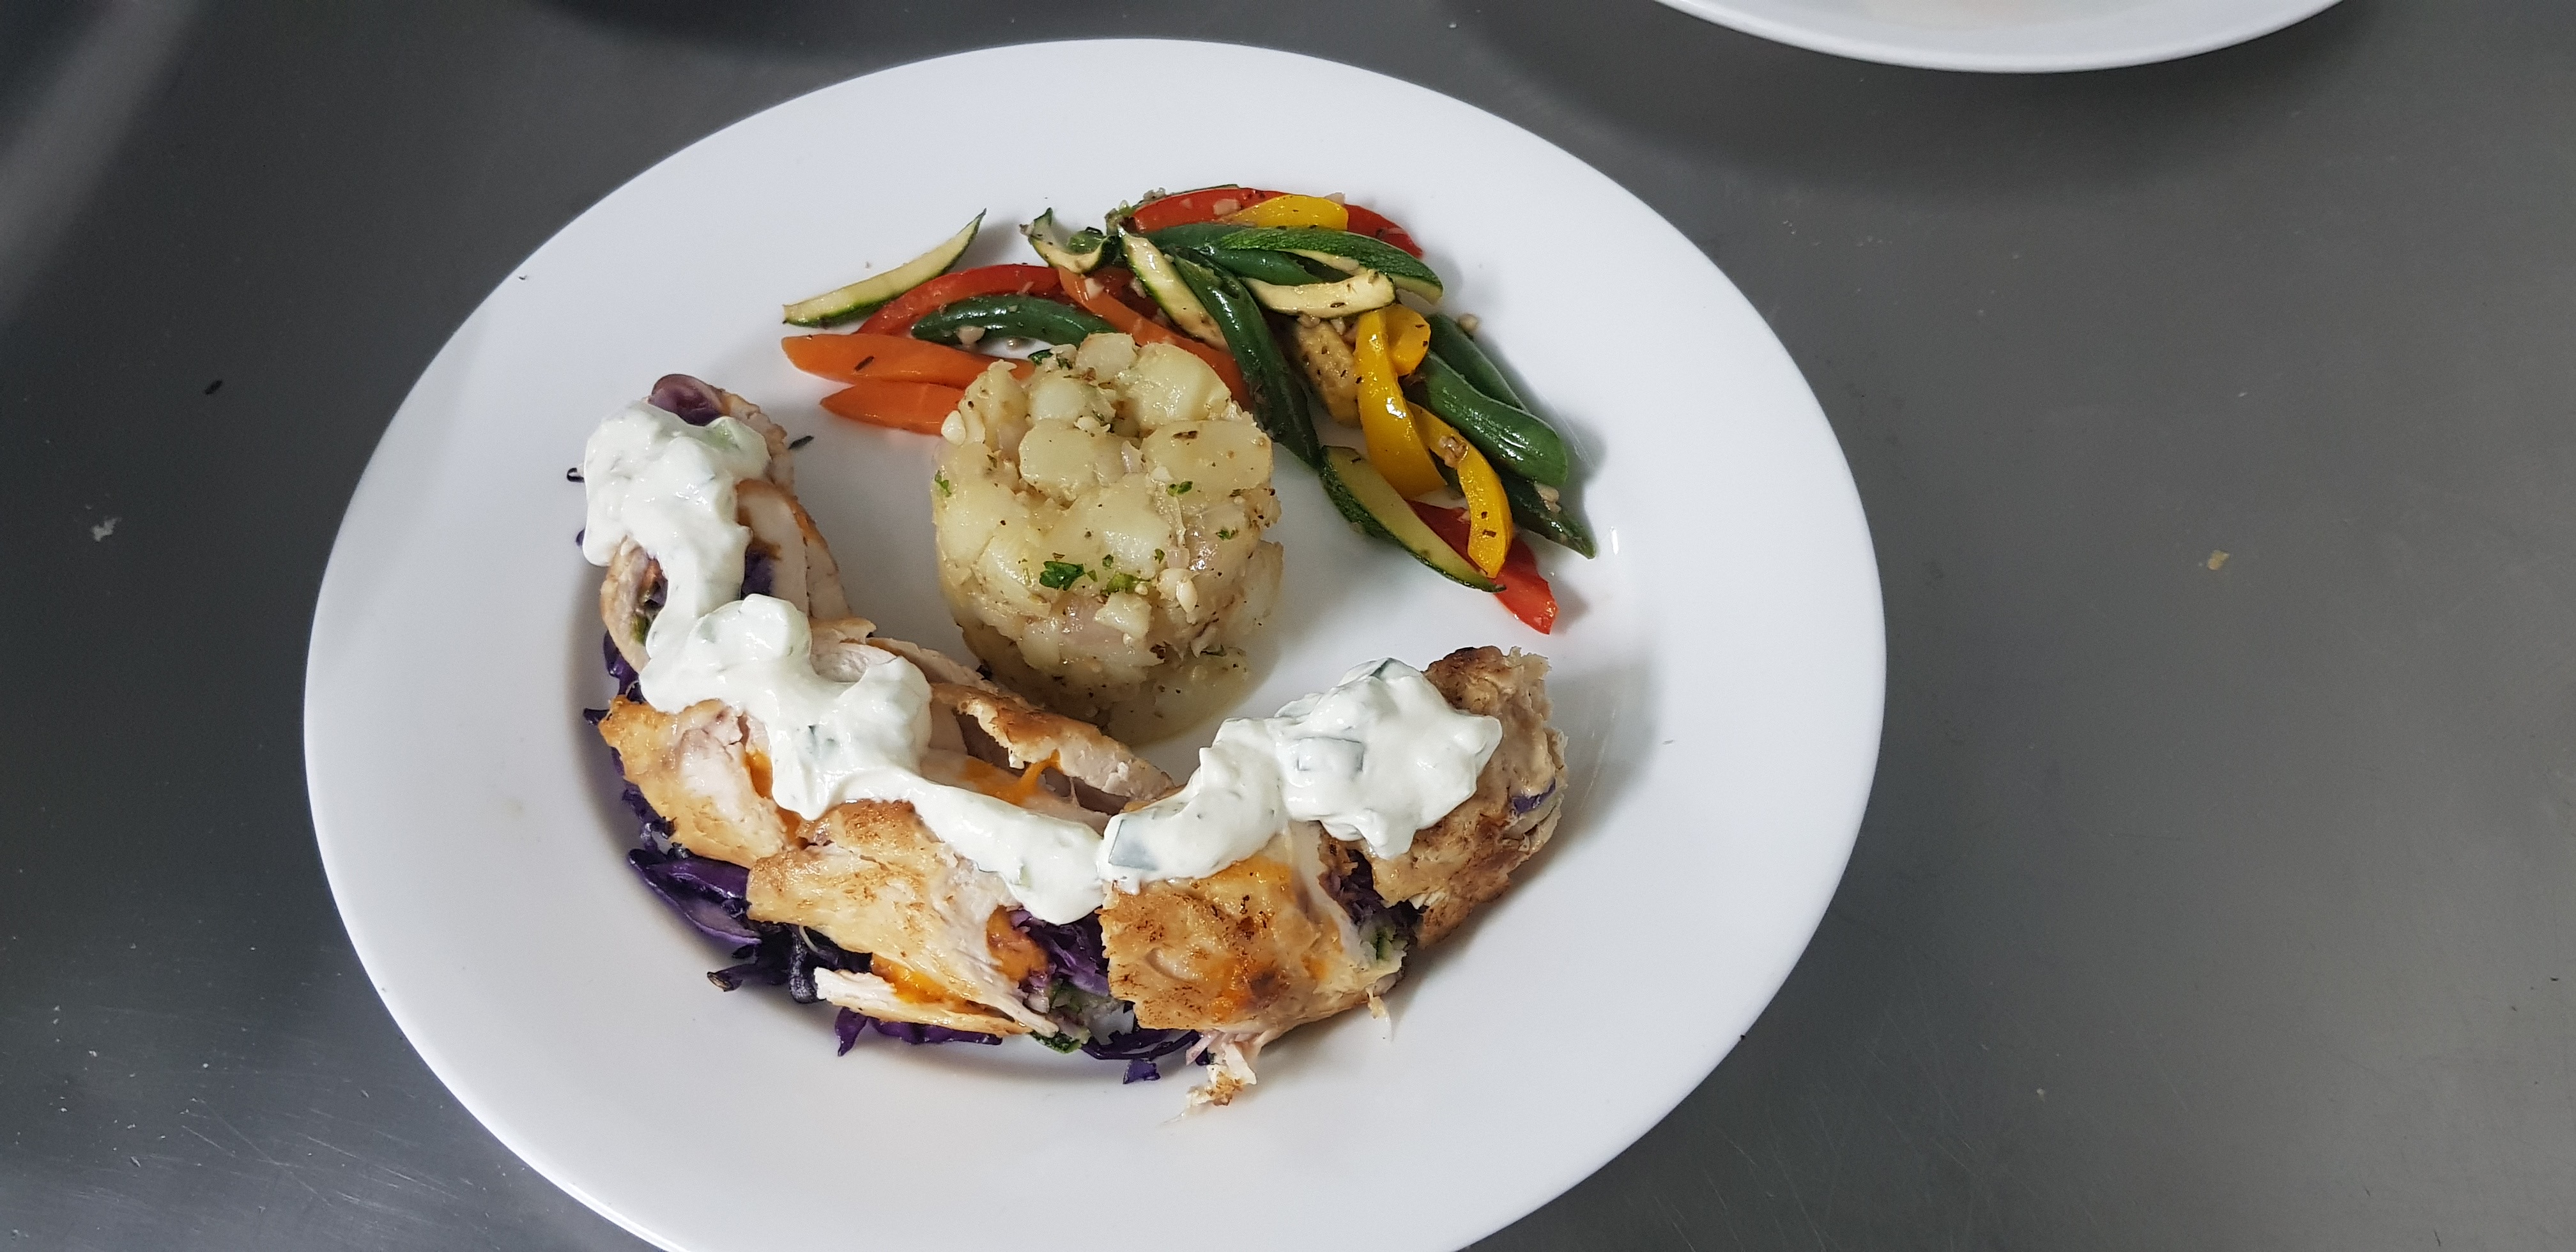 German Chicken Roulade with Cucumber Dil Lemon Sauce by Chef Som, Executive chef, Smaaash Punjab & Hyderabad.